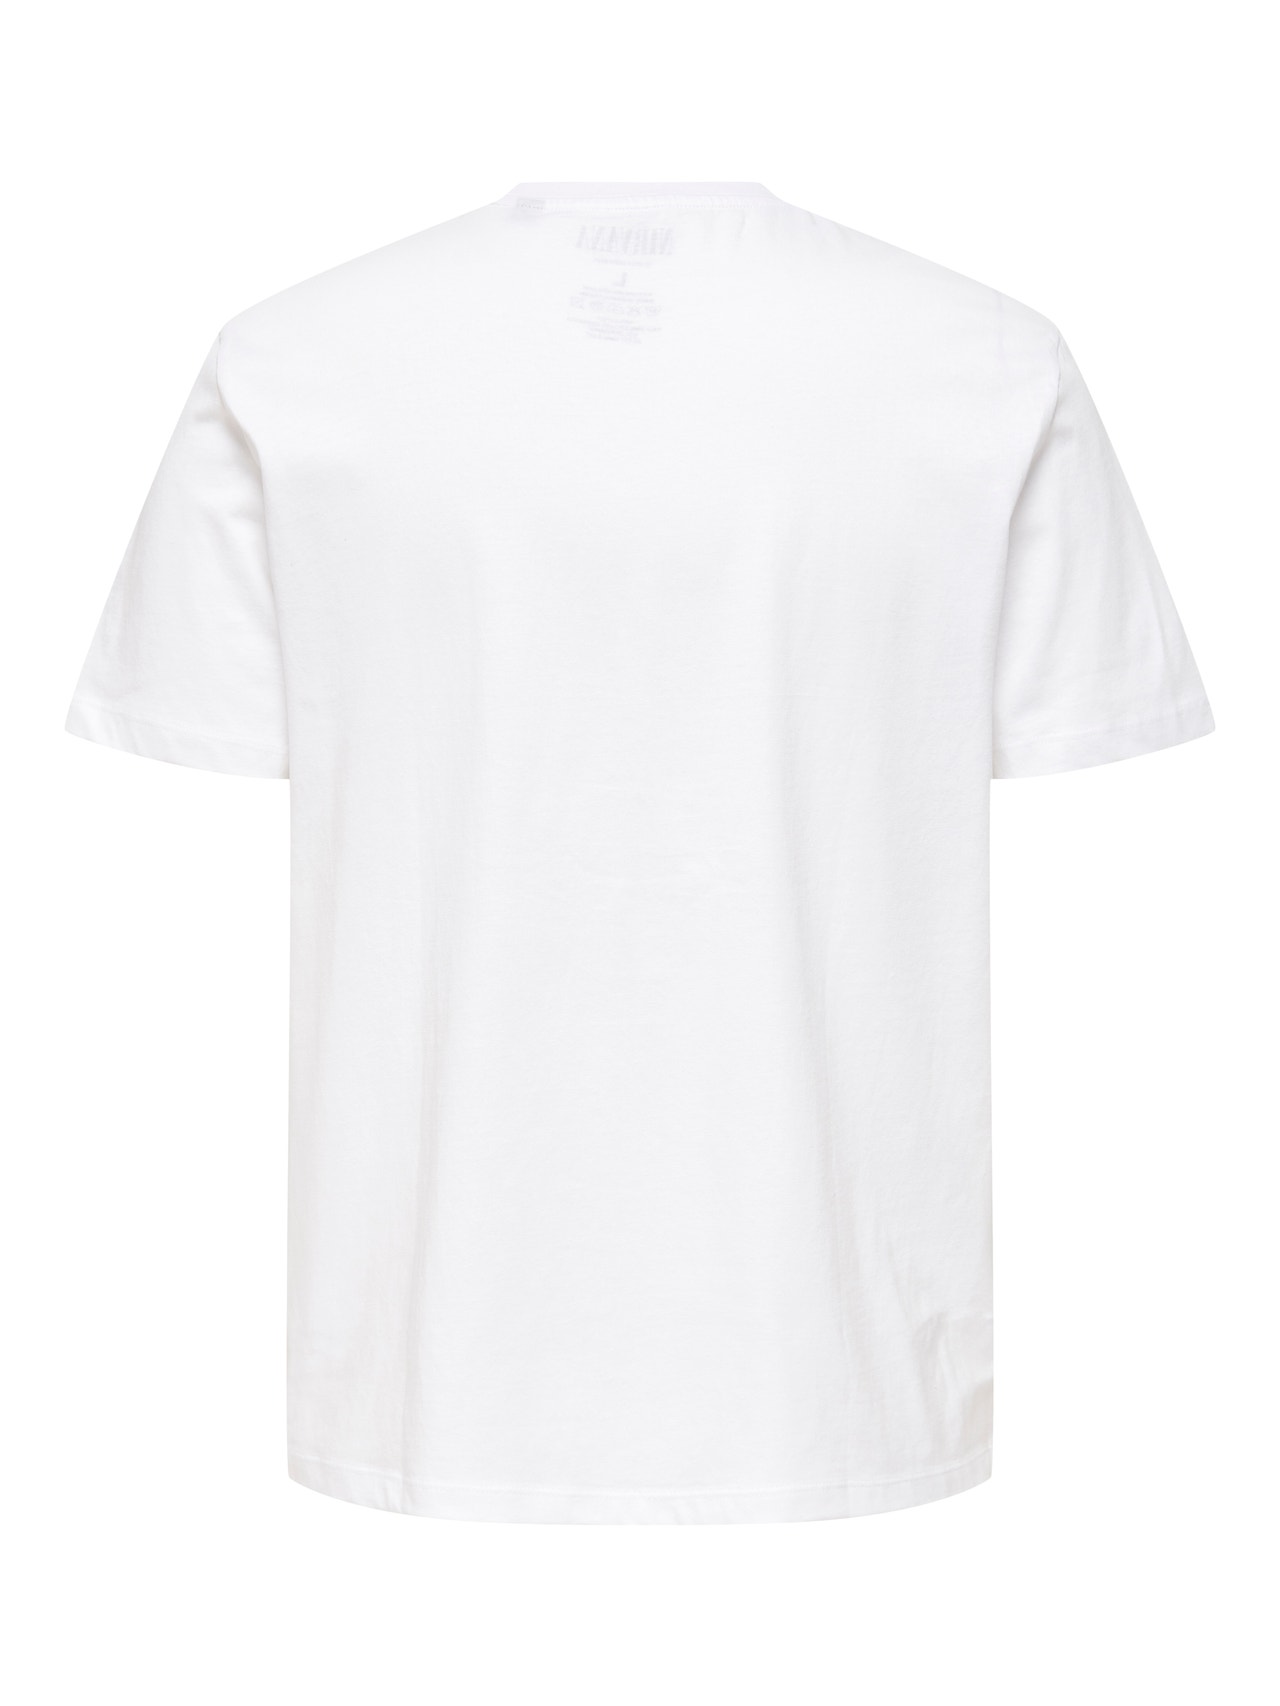 ONLY & SONS Relaxed Fit Round Neck T-Shirt -White - 22023782